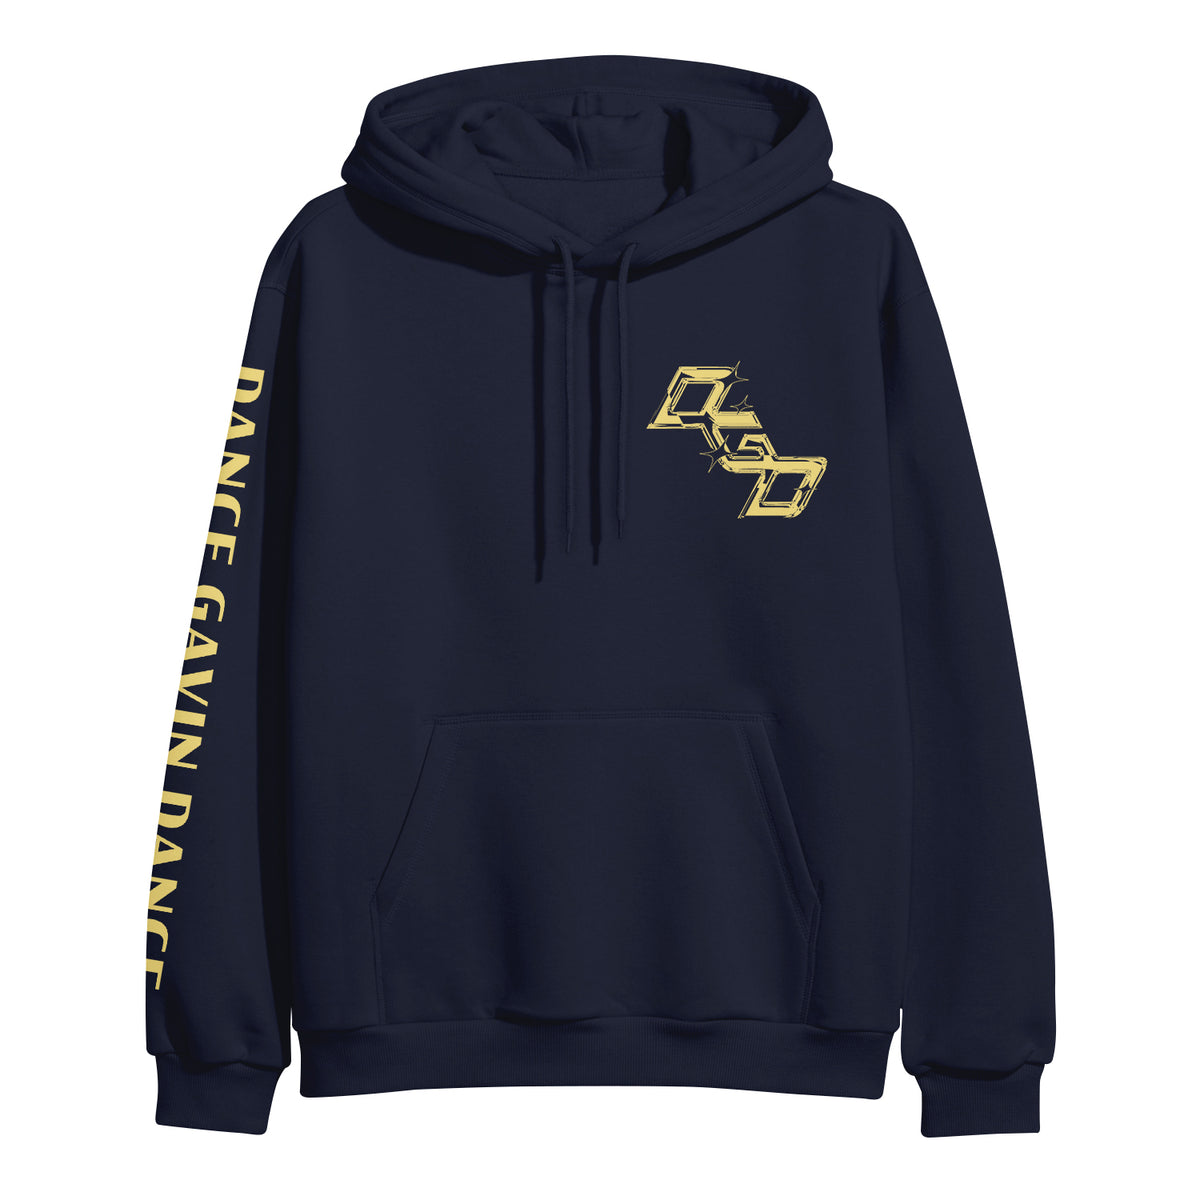 navy pullover hoodie front on white background. front of hoodie has yellow print on full right sleeve that says dance gavin dance, and left chest print in yellow that says D G D. 